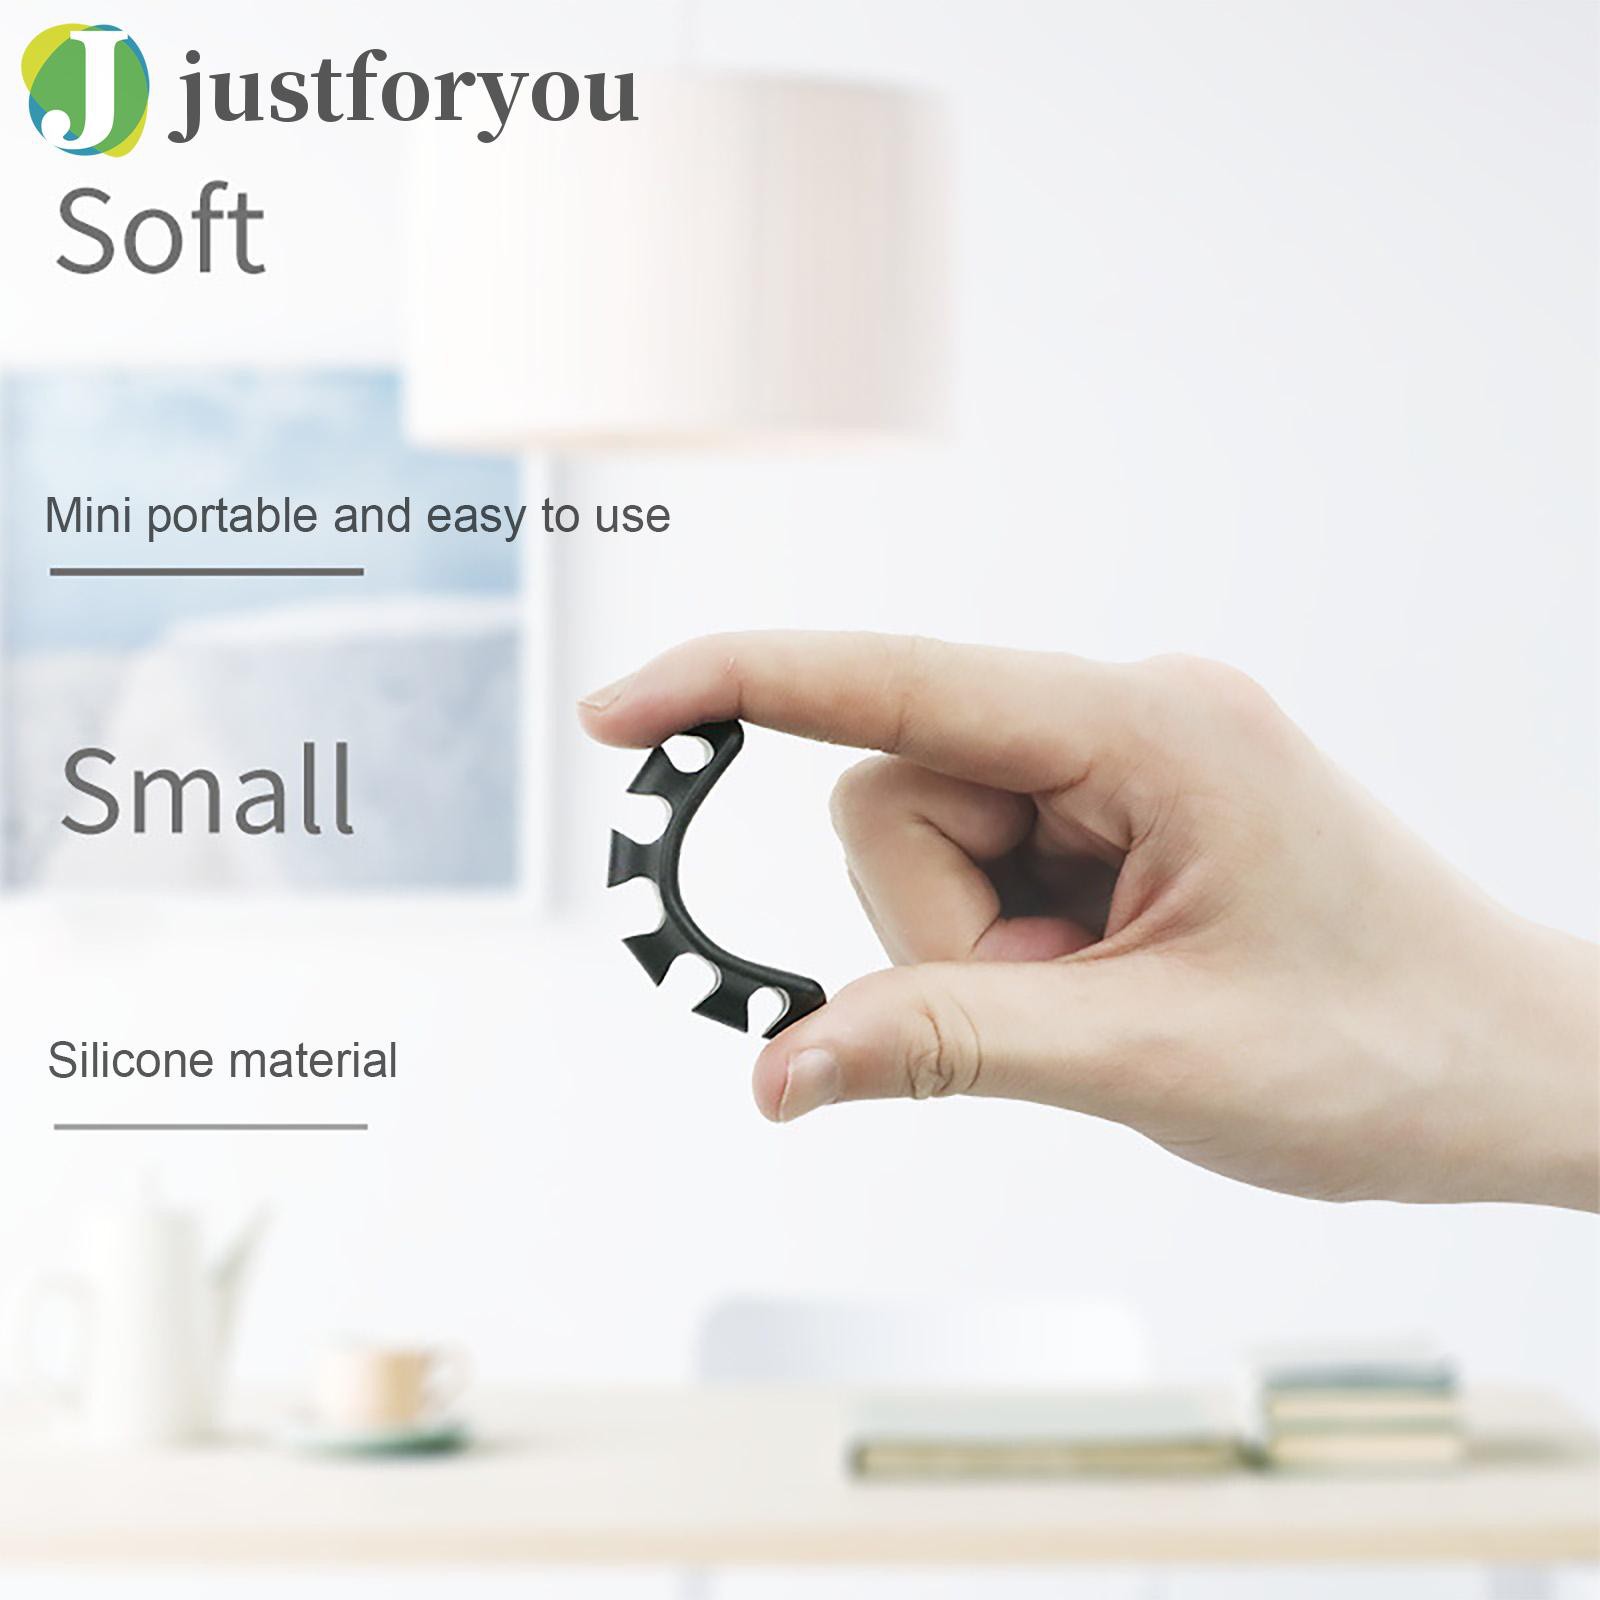 Justforyou Cable Holder Clips Silicone Power Cord Organizer Cable Management 5 Pack